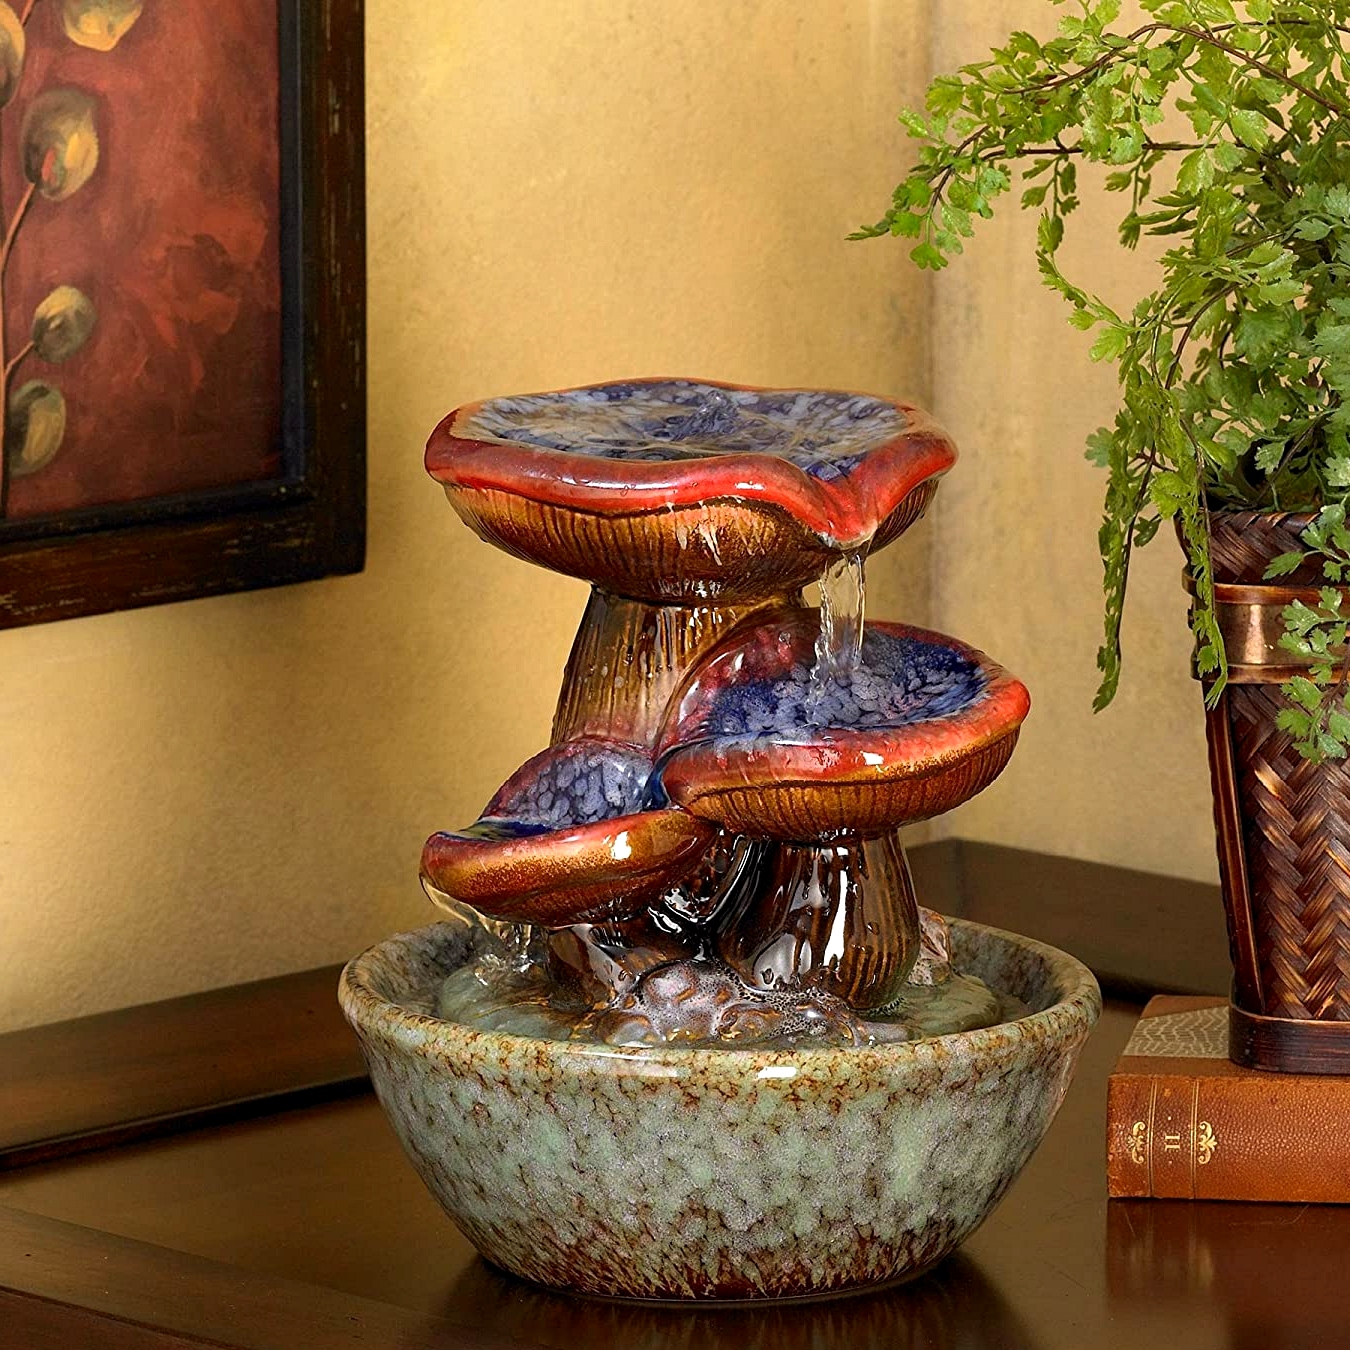 14 Mesmerizing Indoor Water Fountains For A Soothing Ambient In Your Home